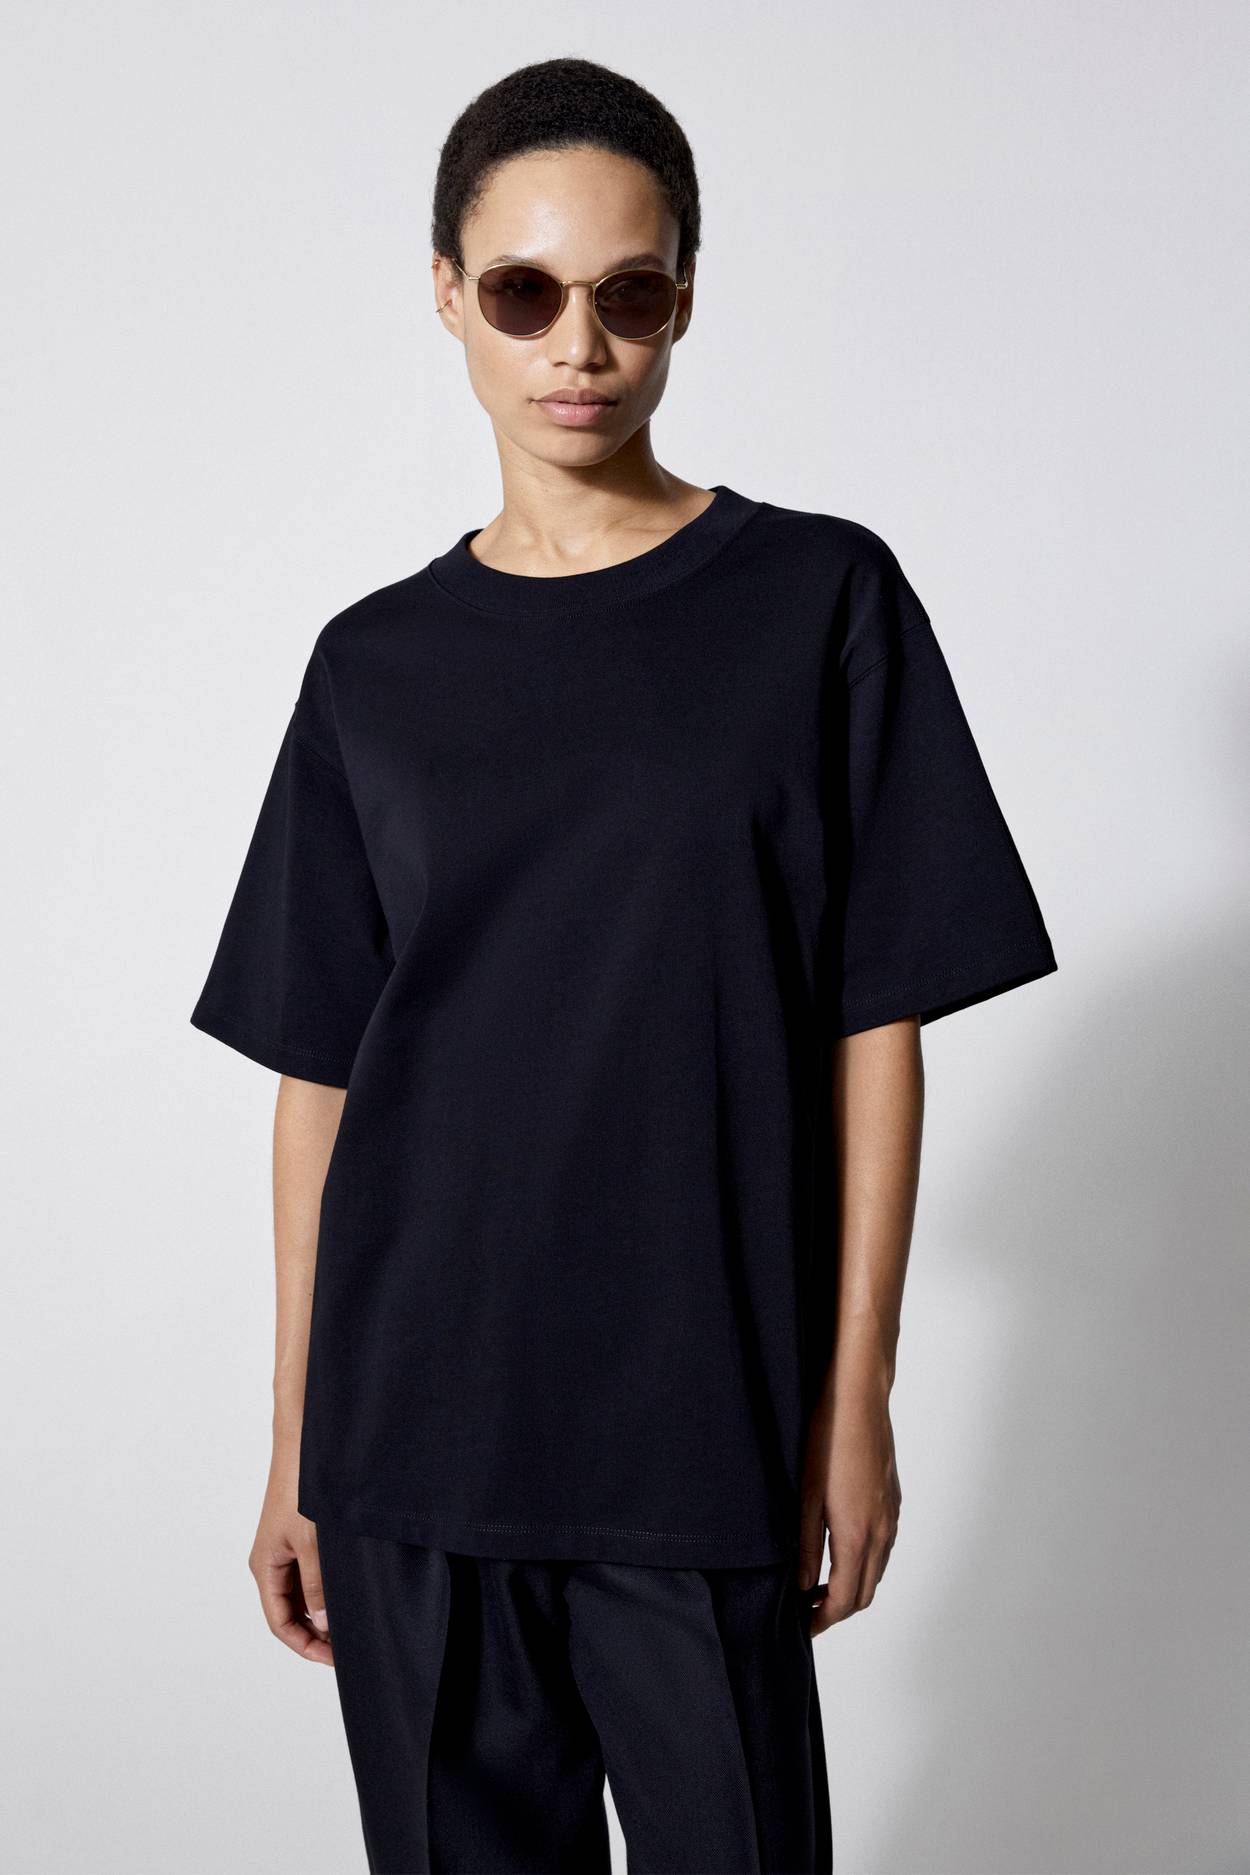 apparat specifikation temperament Shop - House of Dagmar Oversize cotton tee - Black - Official Online Store